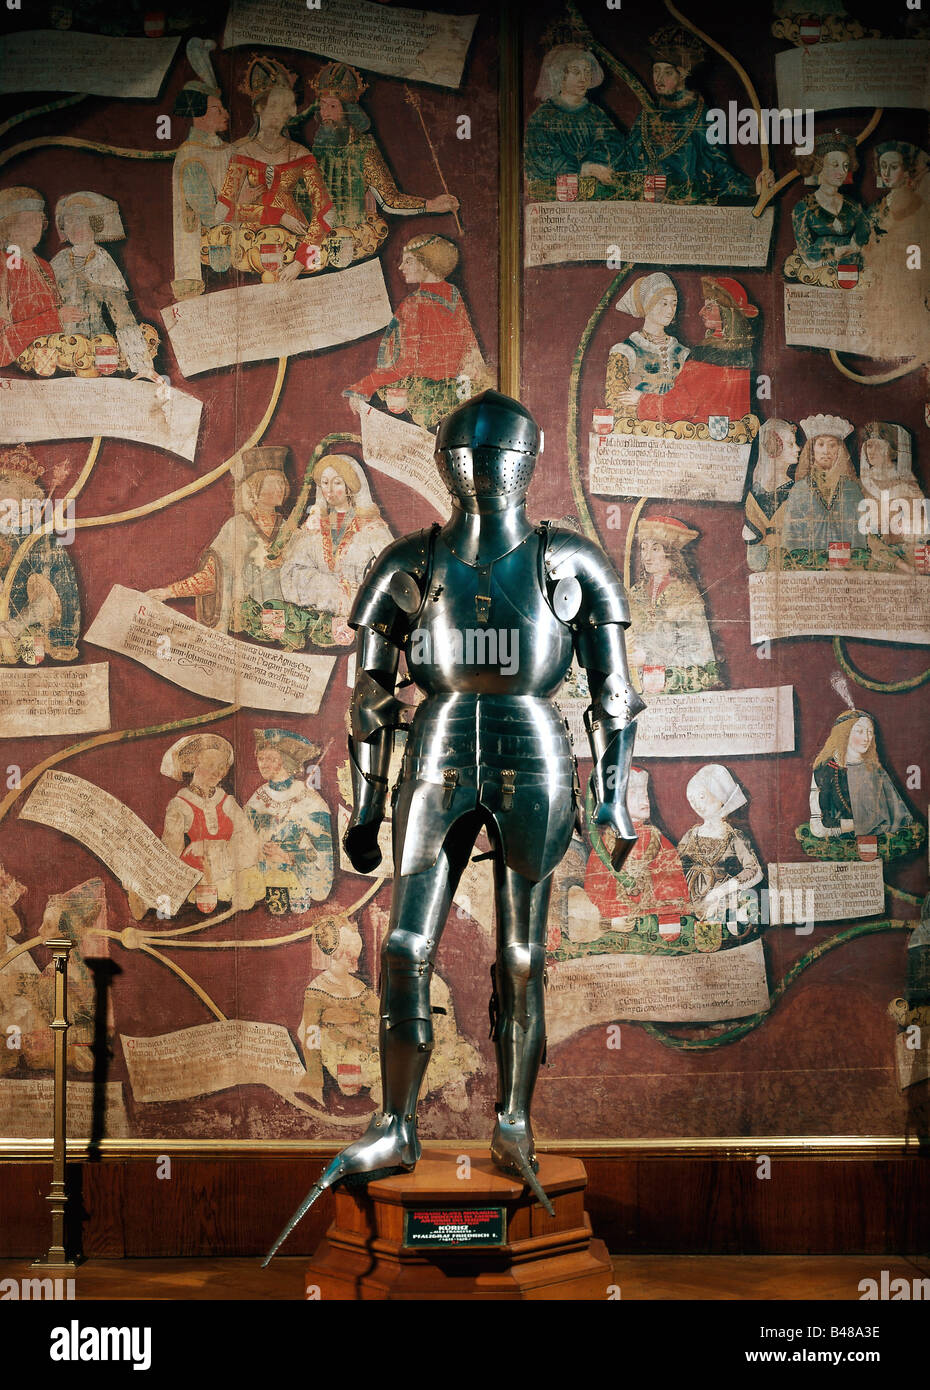 weapons / arms, defensive arms, armour, plate armour for Frederic I (the Victorious), Elector Palatine (1425 - 1476), by Inocenzo da Faerno, Tomaso and Antonio Missaglia, Milan, circa 1450, Habsburg family tree from 1497 in the background, Museum of Art History, Vienna, collection of arms and armour, Stock Photo